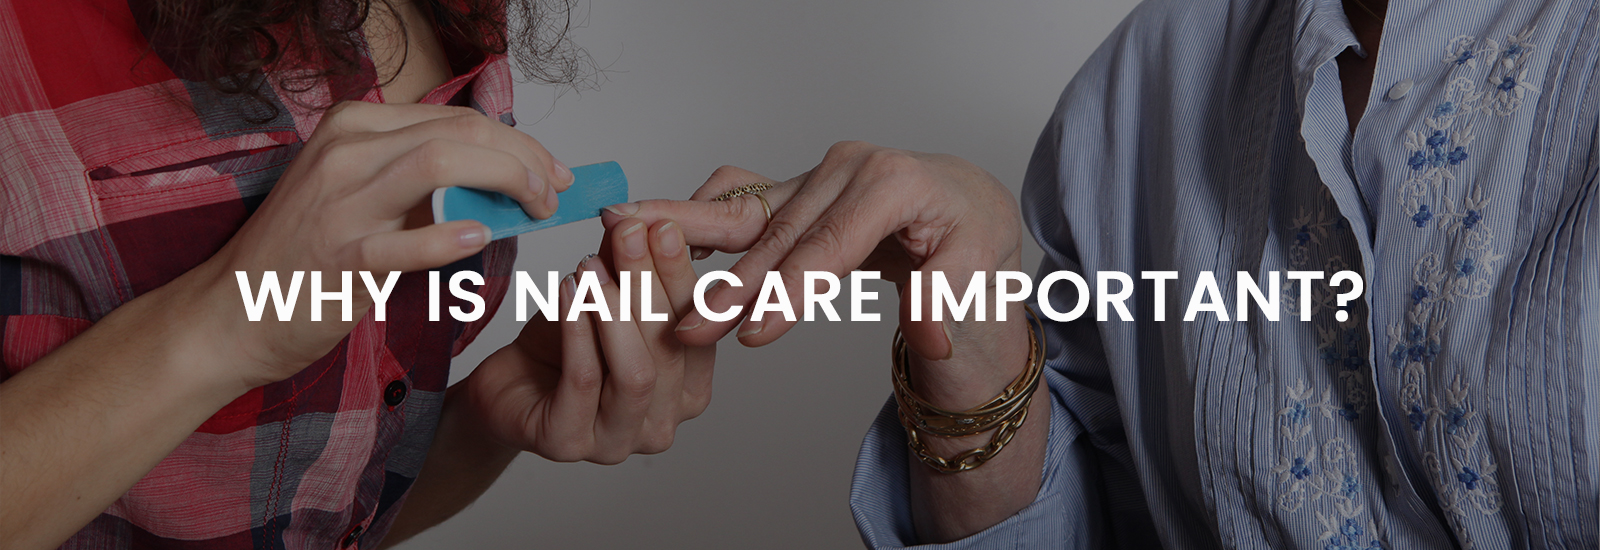 Why is Nail Care Important? | Banner Image